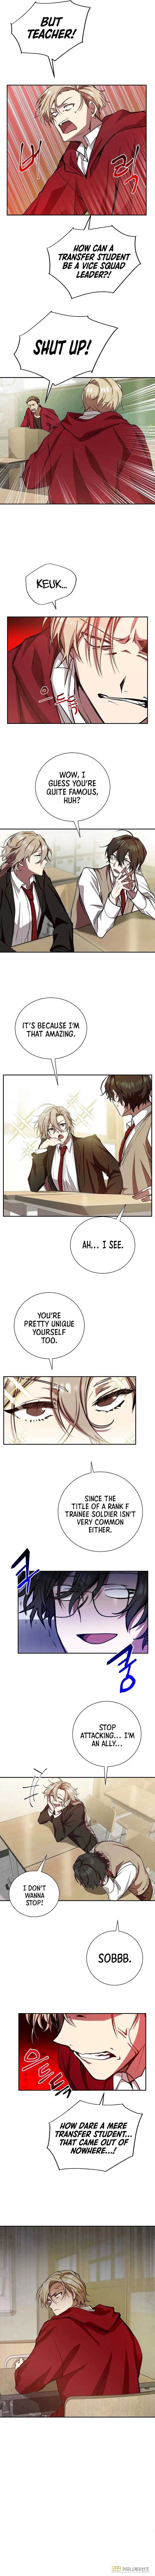 My School Life Pretending To Be a Worthless Person - Chapter 9 Page 9